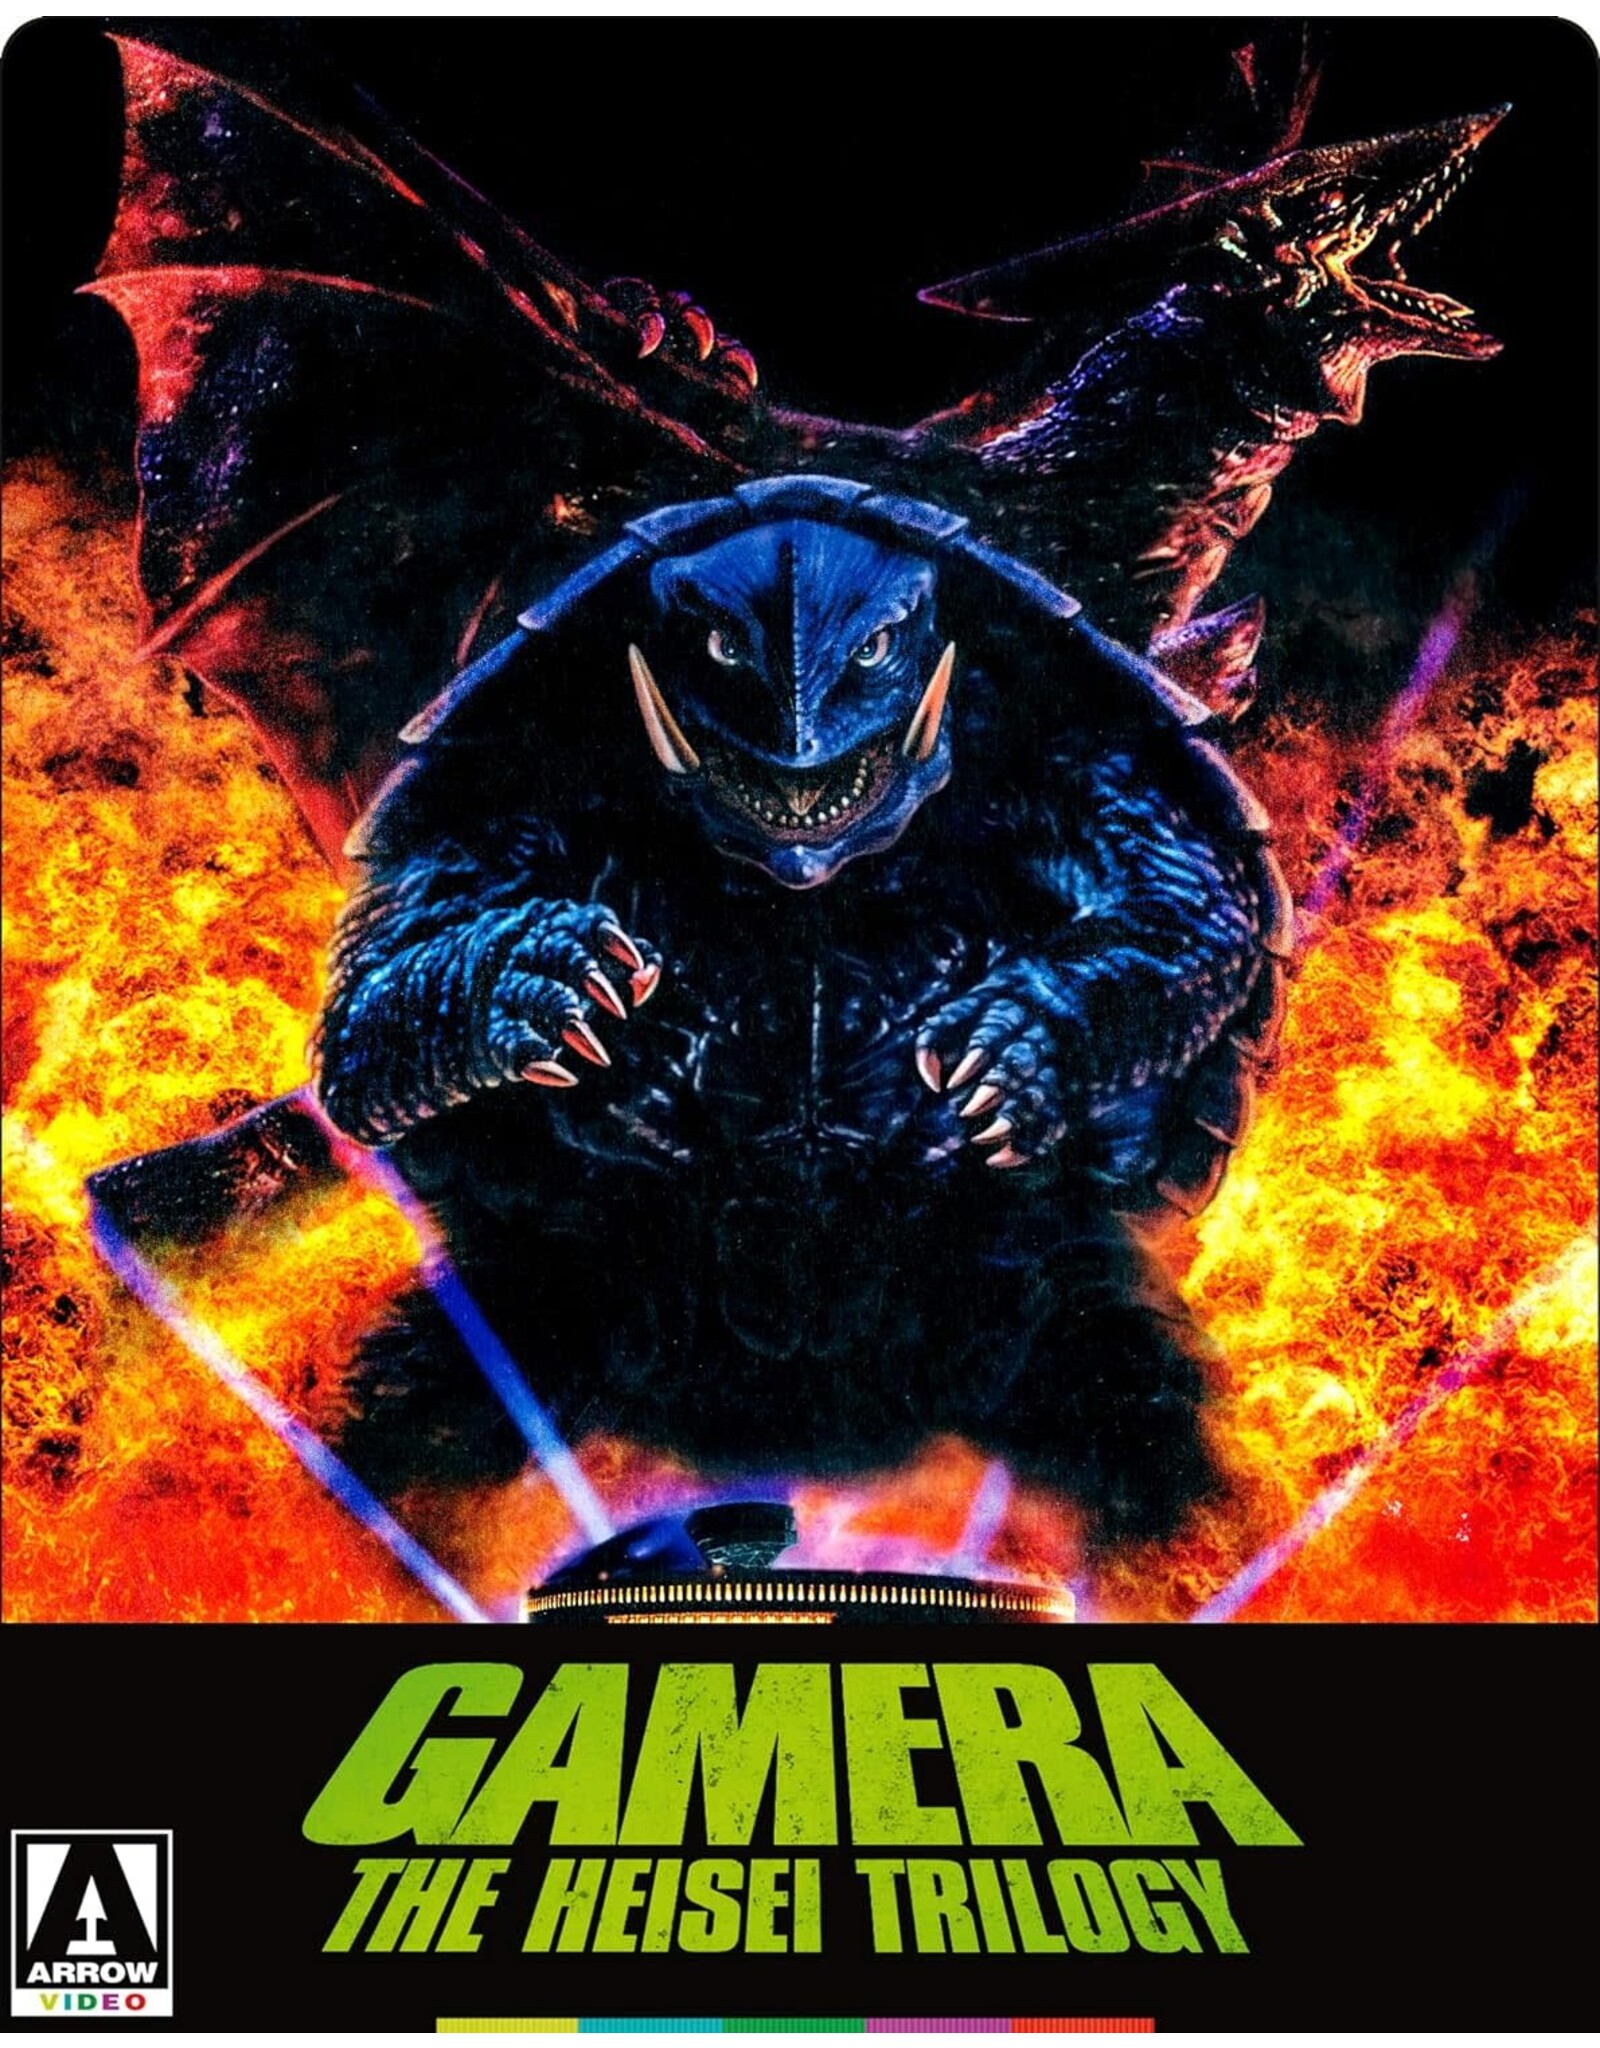 Cult and Cool Gamera The Heisei Trilogy Limited Edition Steelbook - Arrow Video (Used)